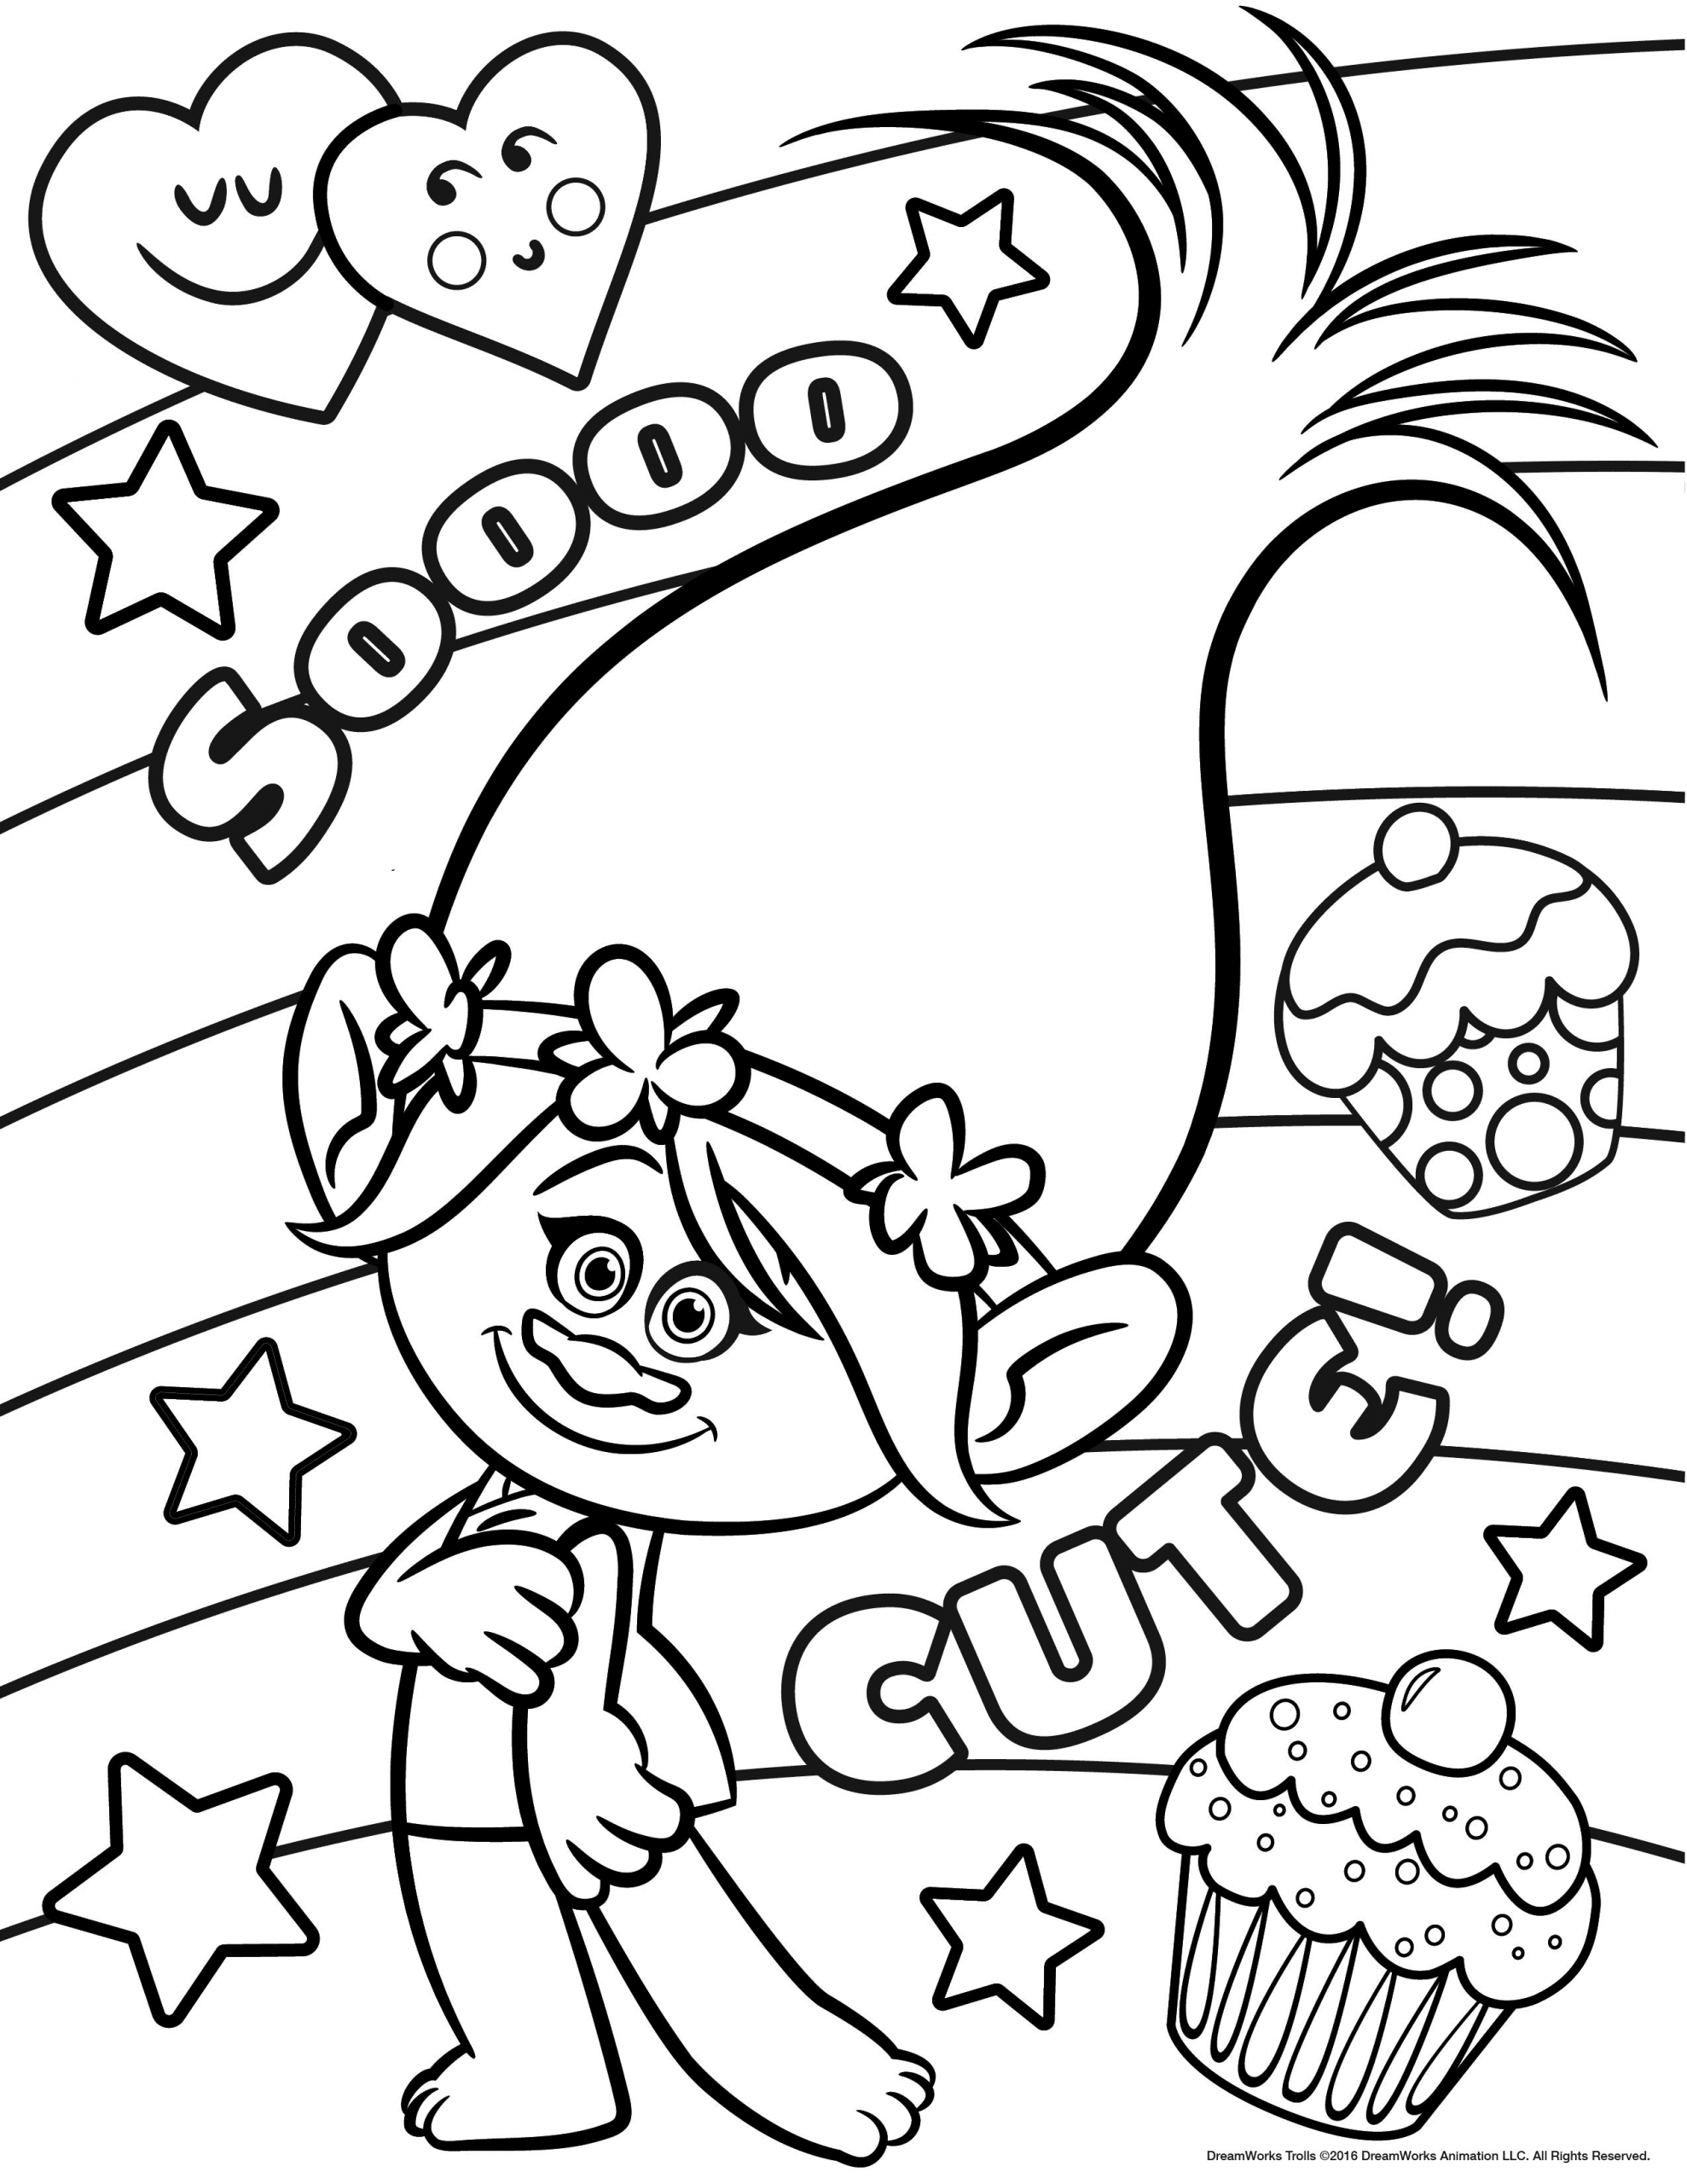 Coloring Pages For Kids Trolls
 Trolls Movie Coloring Pages Best Coloring Pages For Kids